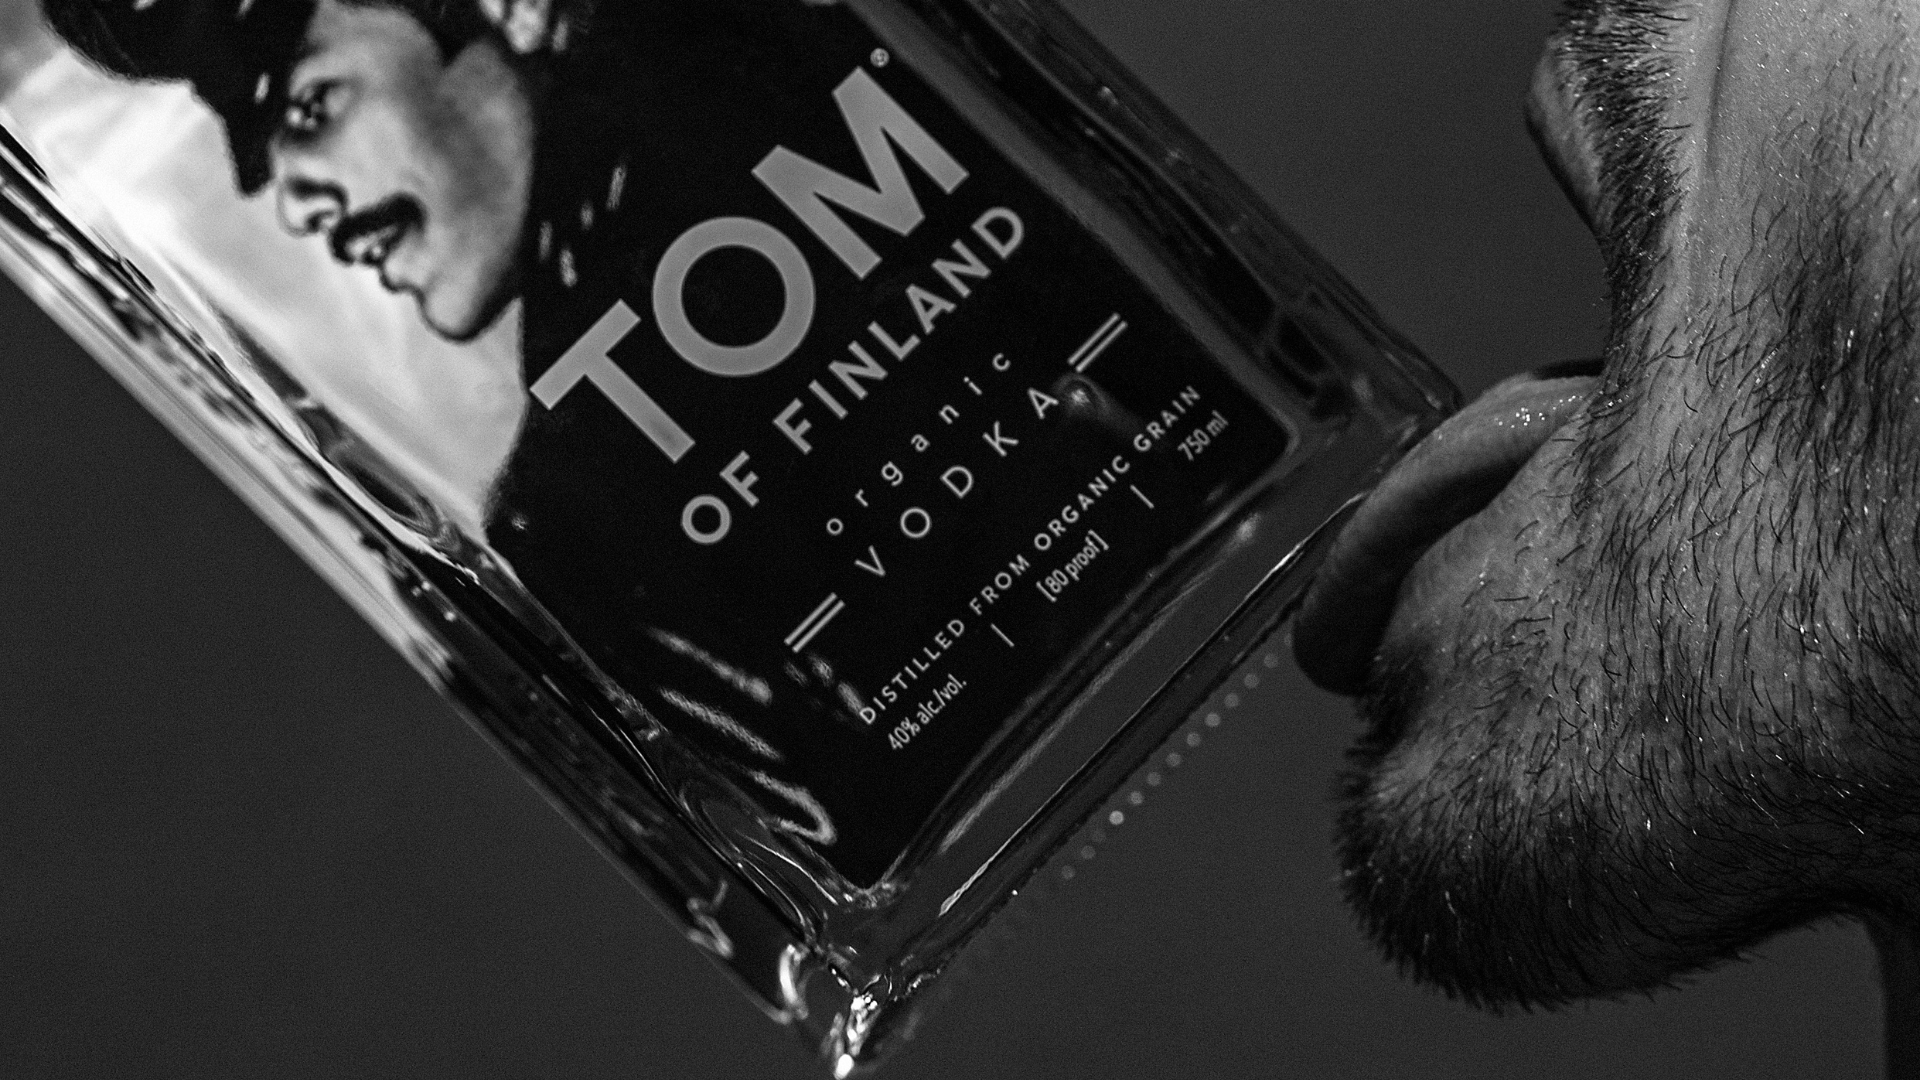 Tom of Finland Organic Vodka® sponsors photo competition and charity auction picture